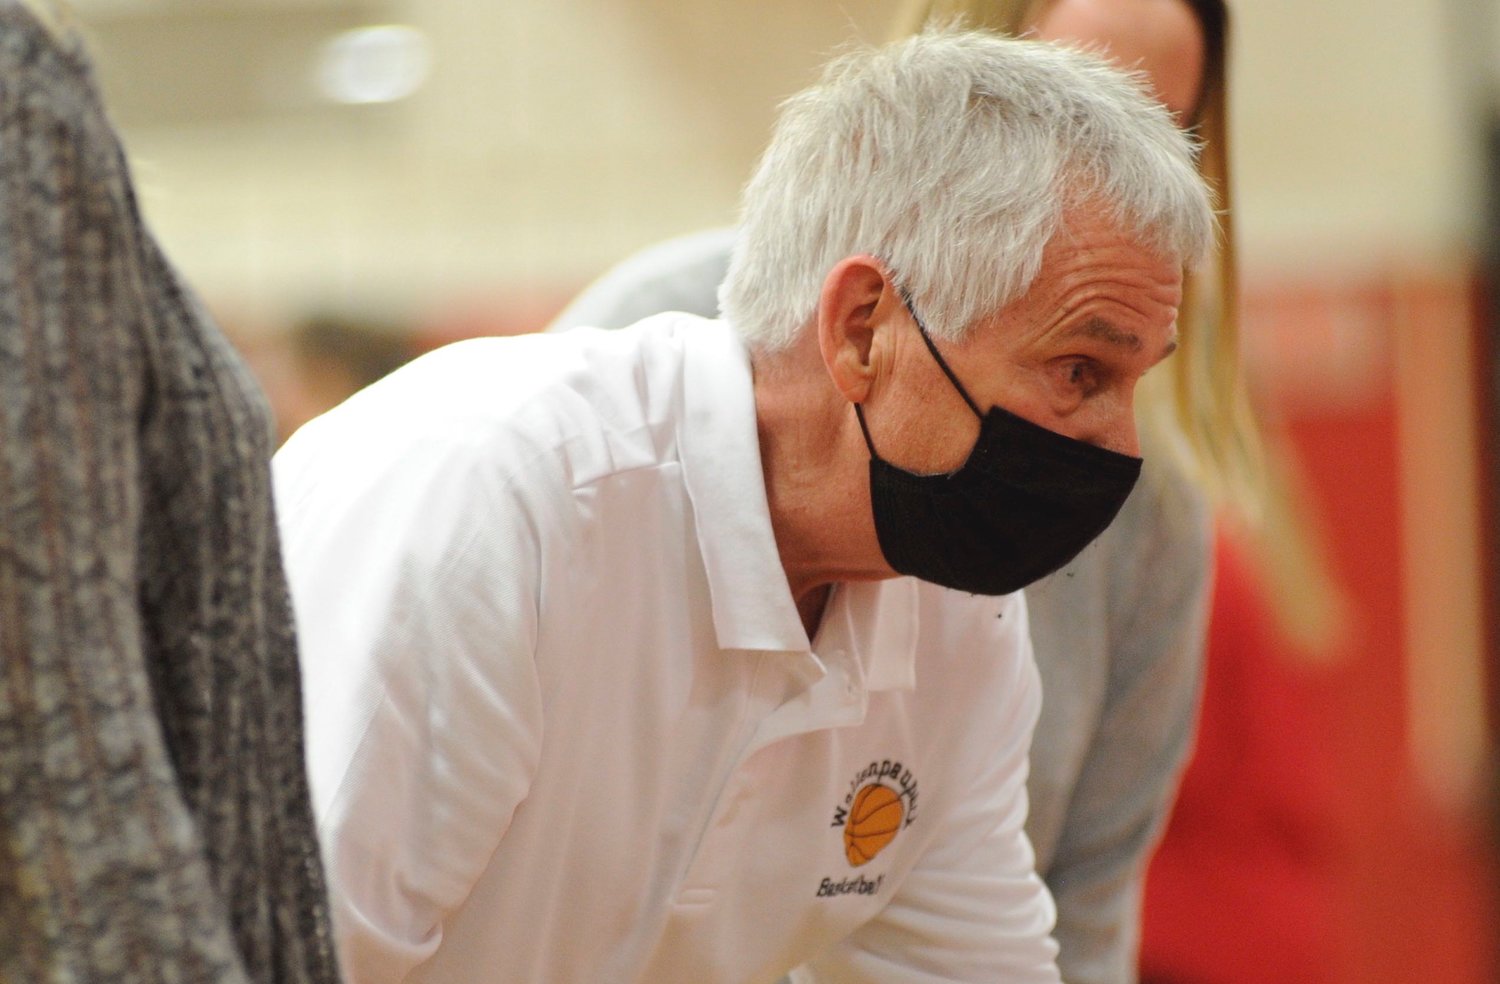 Experience counts. Wallenpaupack’s veteran coach has been in the game of hoops for 40+ years.